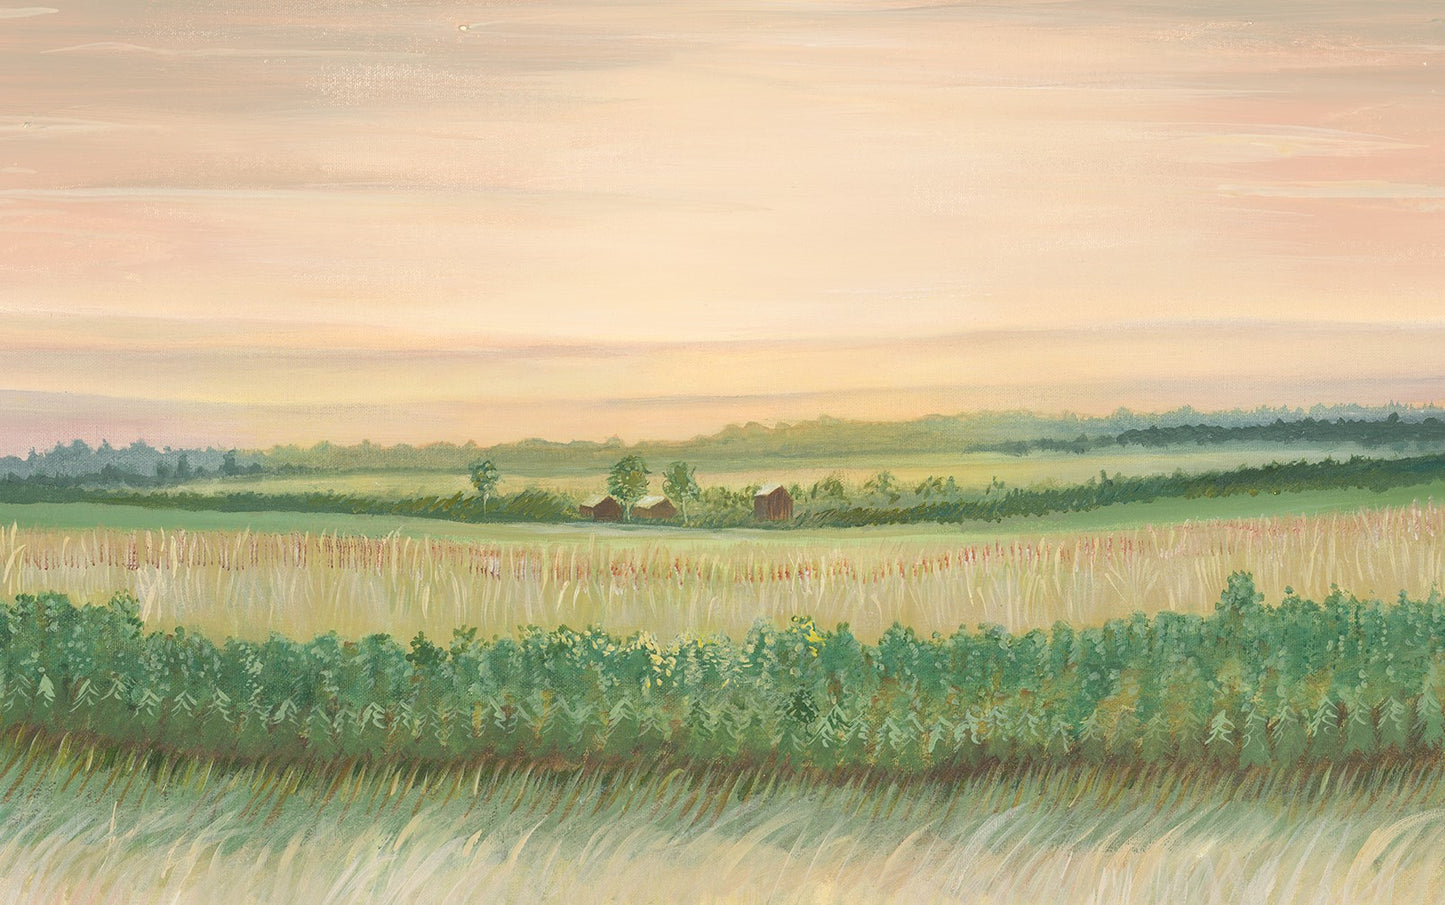 Original Painting. Weathered Landing's Field at Sunset Canvas Wall Art Print. Canvas art prints made in Canada and US. Beautiful in a farmhouse, country, or rustic home. Find a variety of home decor and canvas wall art prints at Weathered Landing. Located in Komoka, Ontario, local delivery is available. Shipping to Canada and the US.